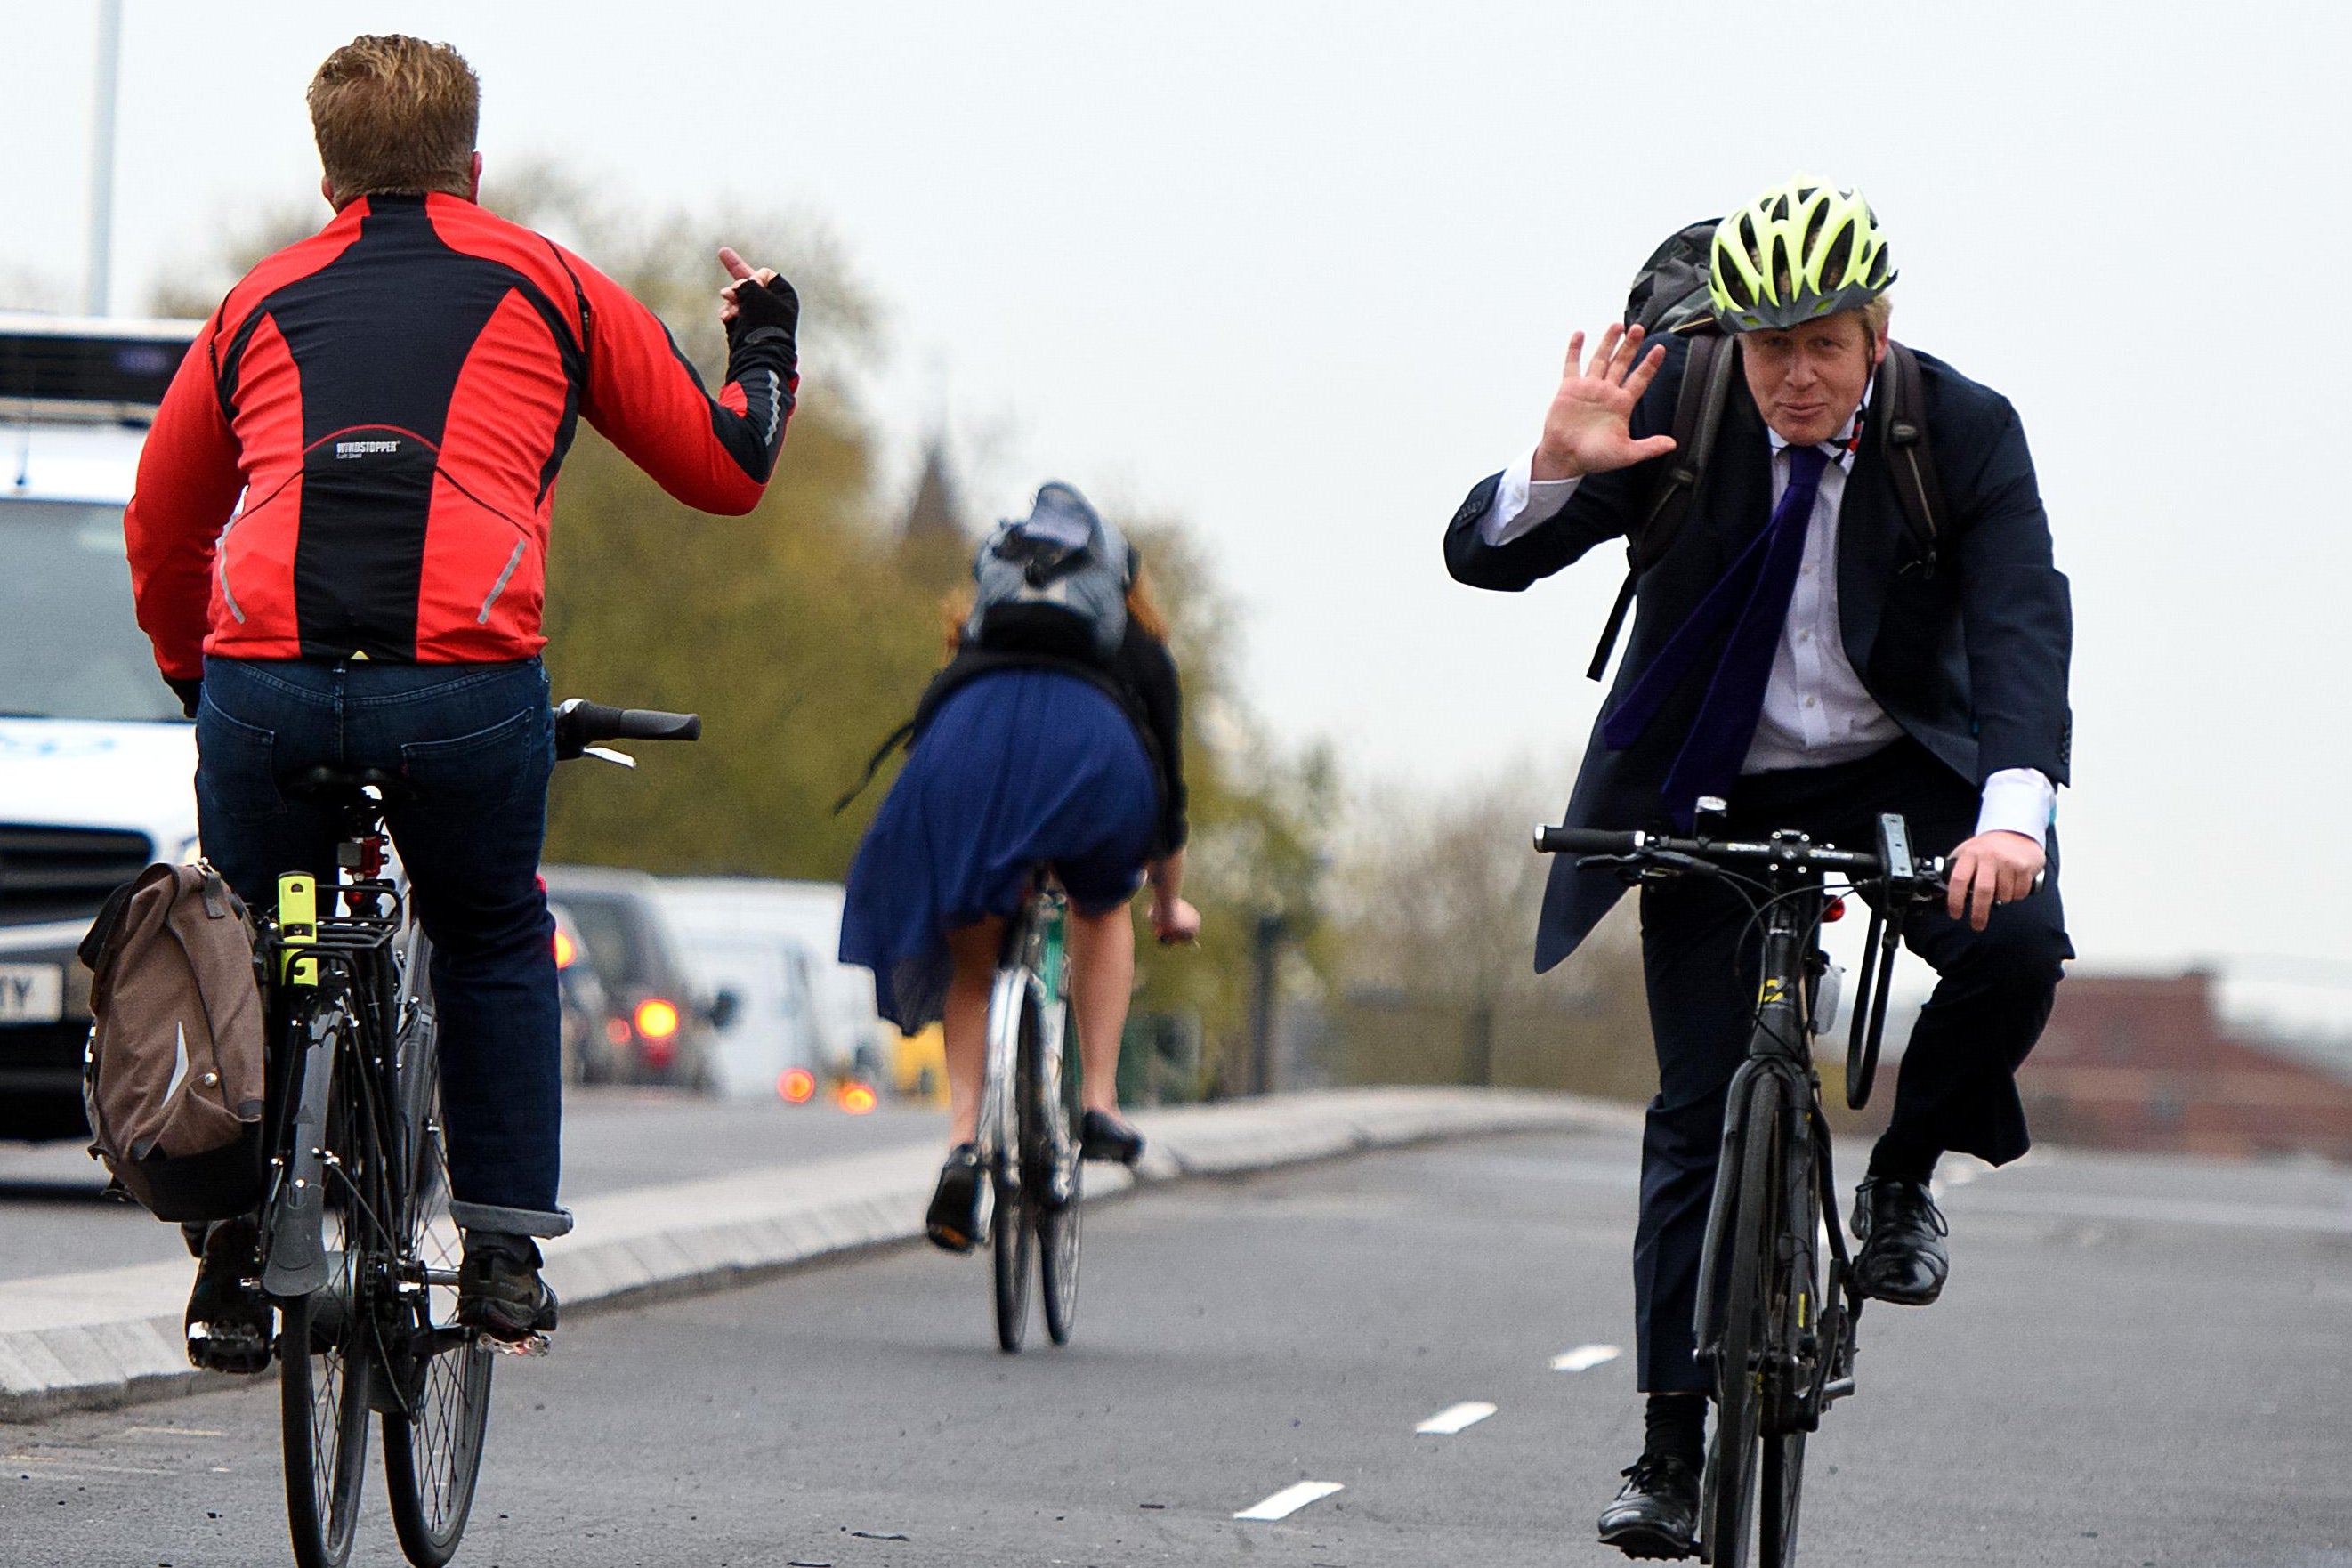 A biker (L) flips off Boris Johnson (R) as he waves and approaches on a bike.